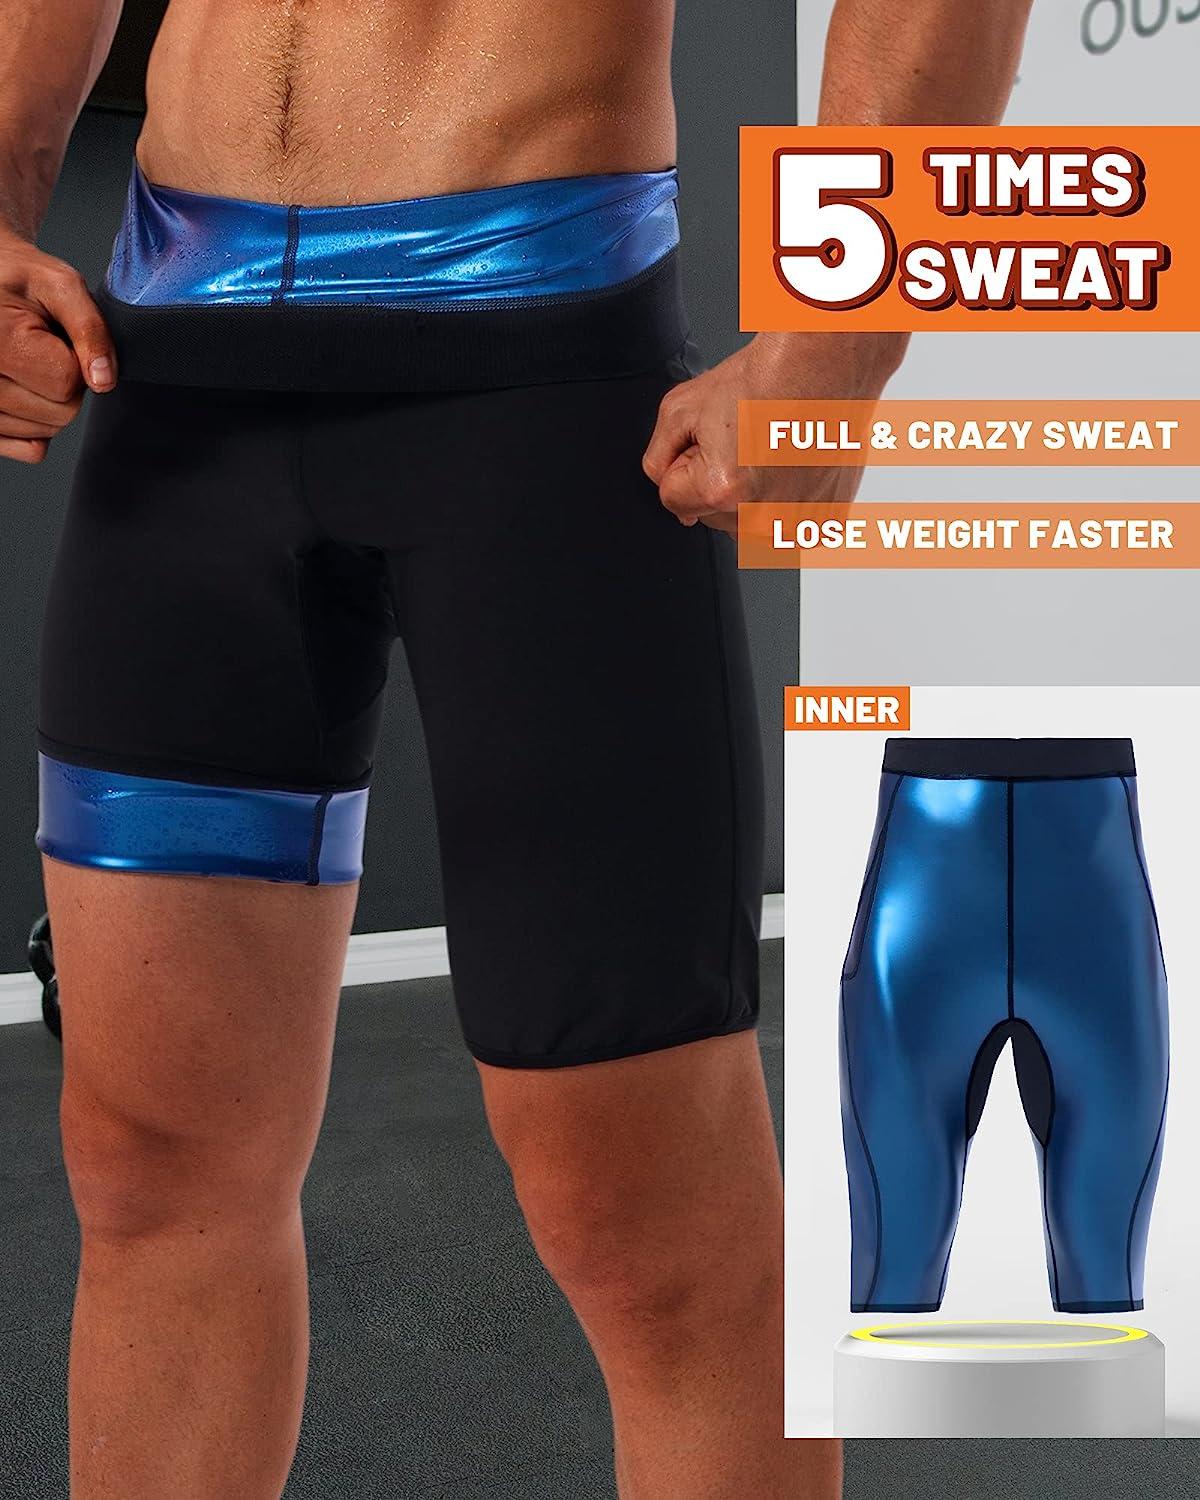 Sweat Sauna Pants for Men Hot Thermo Body Shaper Fitness Weight Loss  Legging US